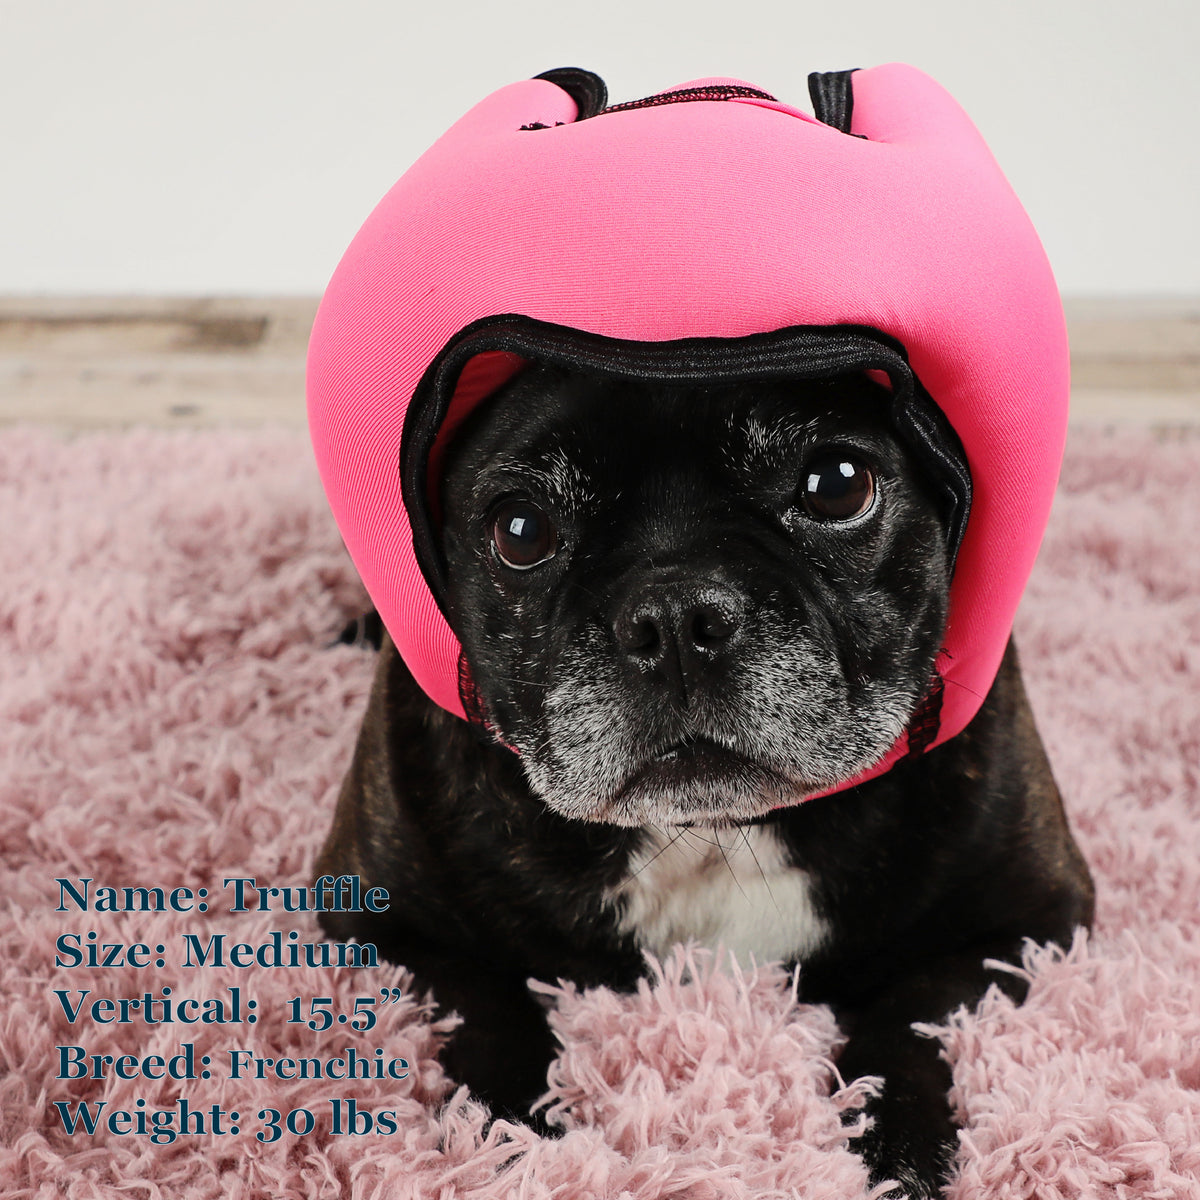 Truffle is a Frenchie in a Medium Pink PAWNIX Noise Cancelling Headset for dogs